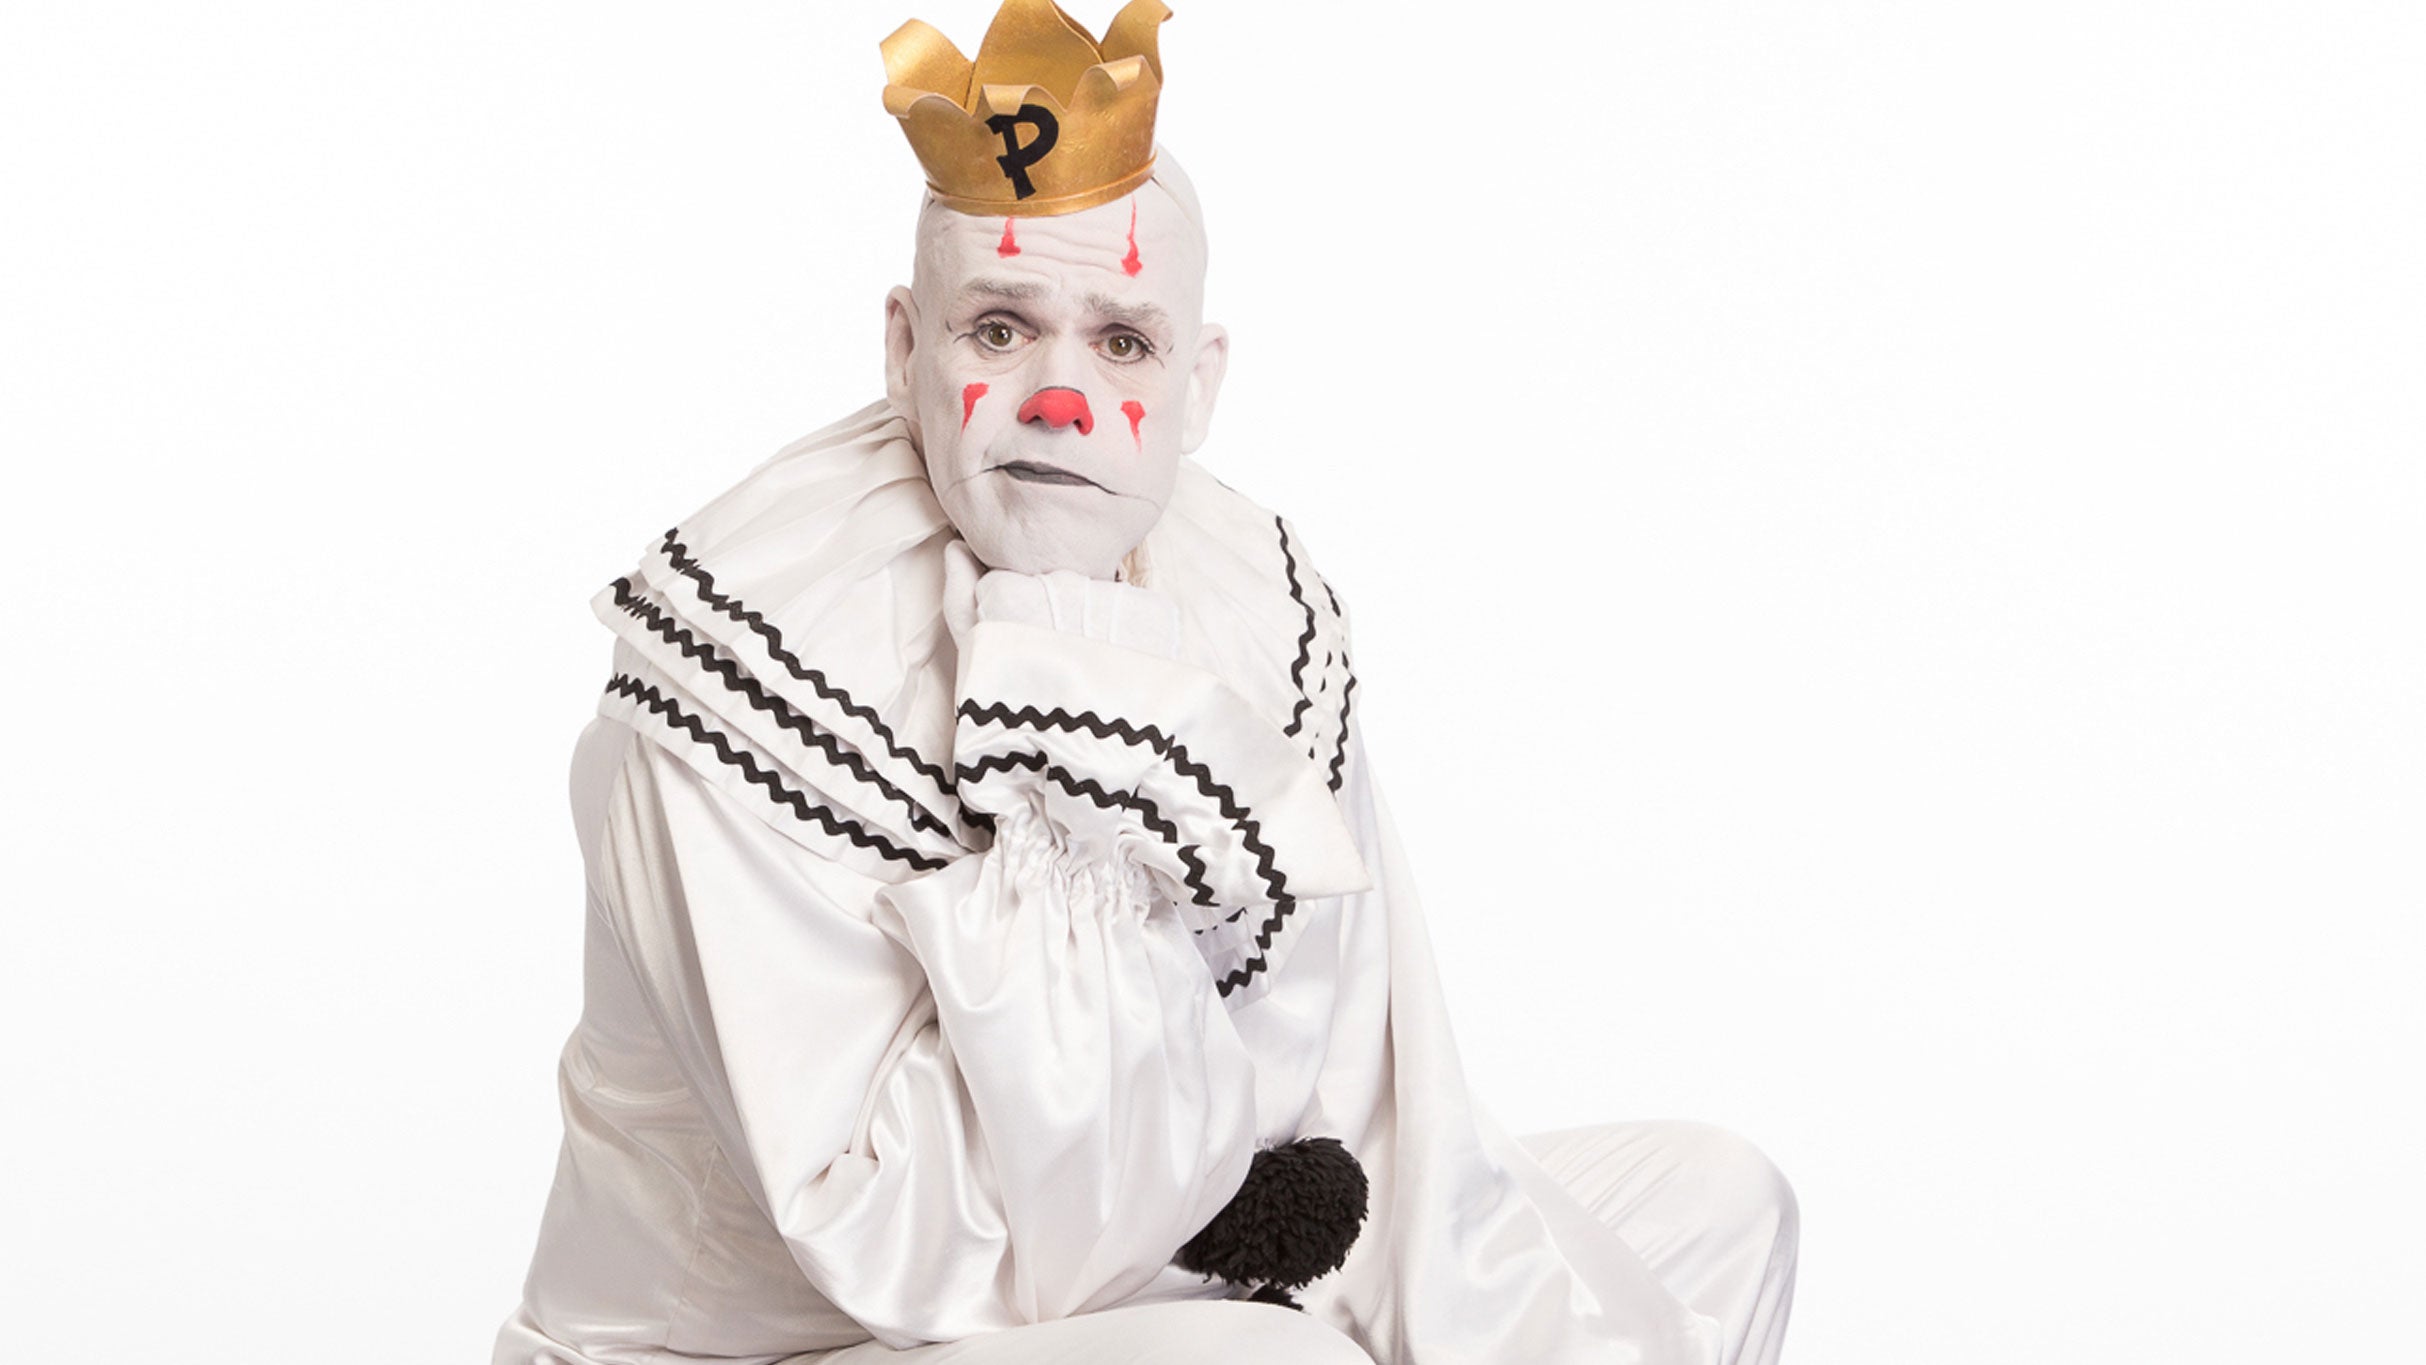 SOLD OUT - Puddles Pity Party at SPACE